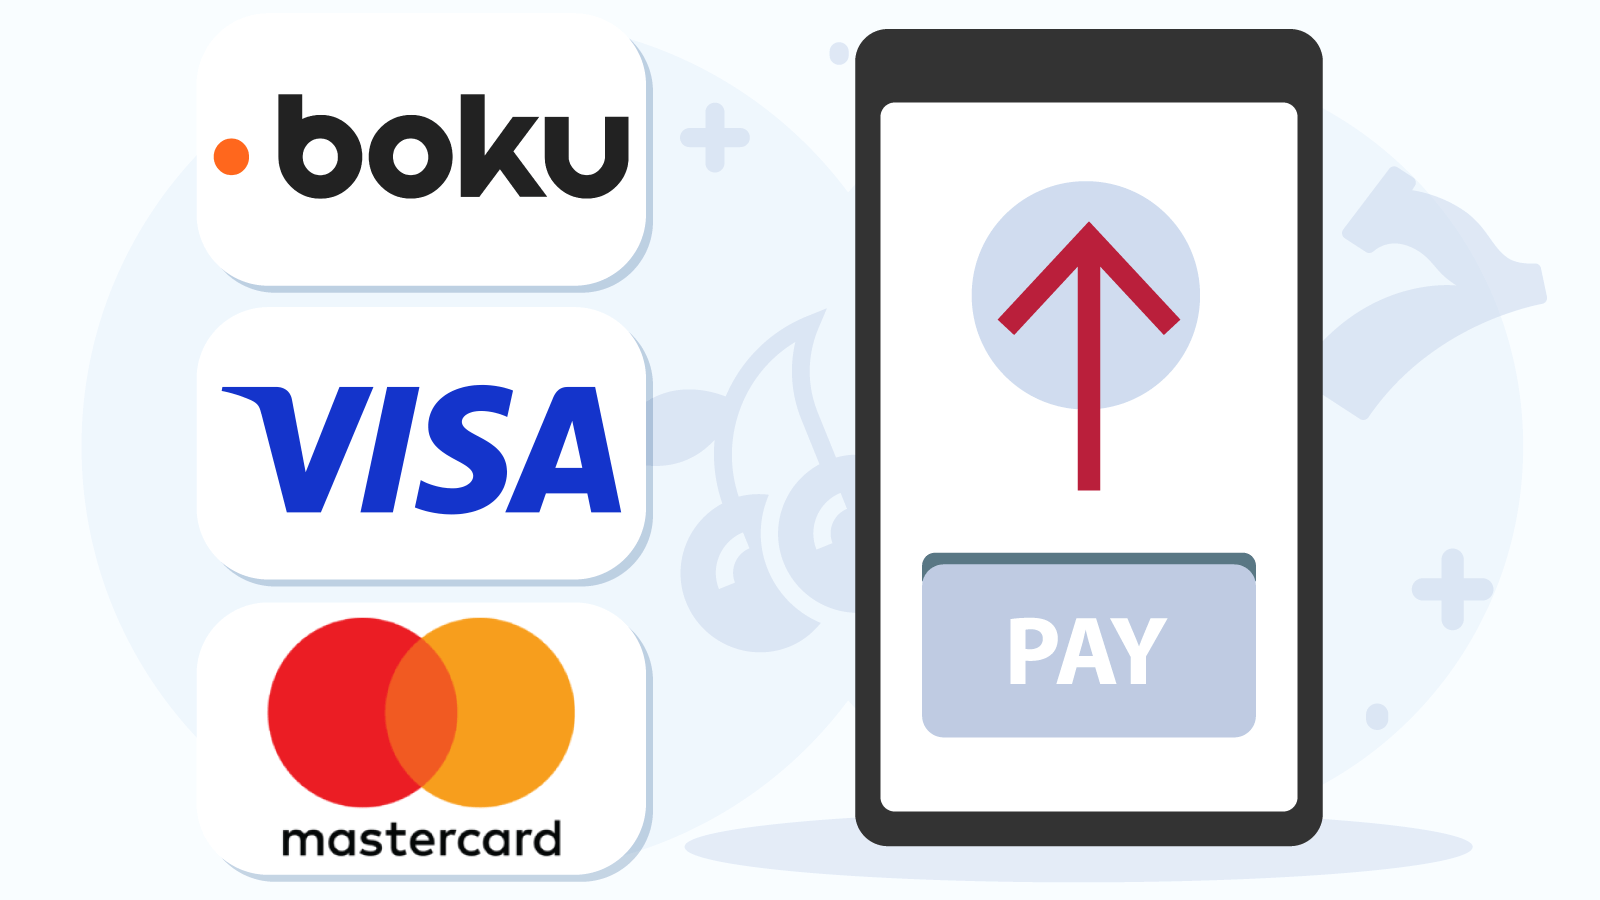 Mobile-Friendly Payments